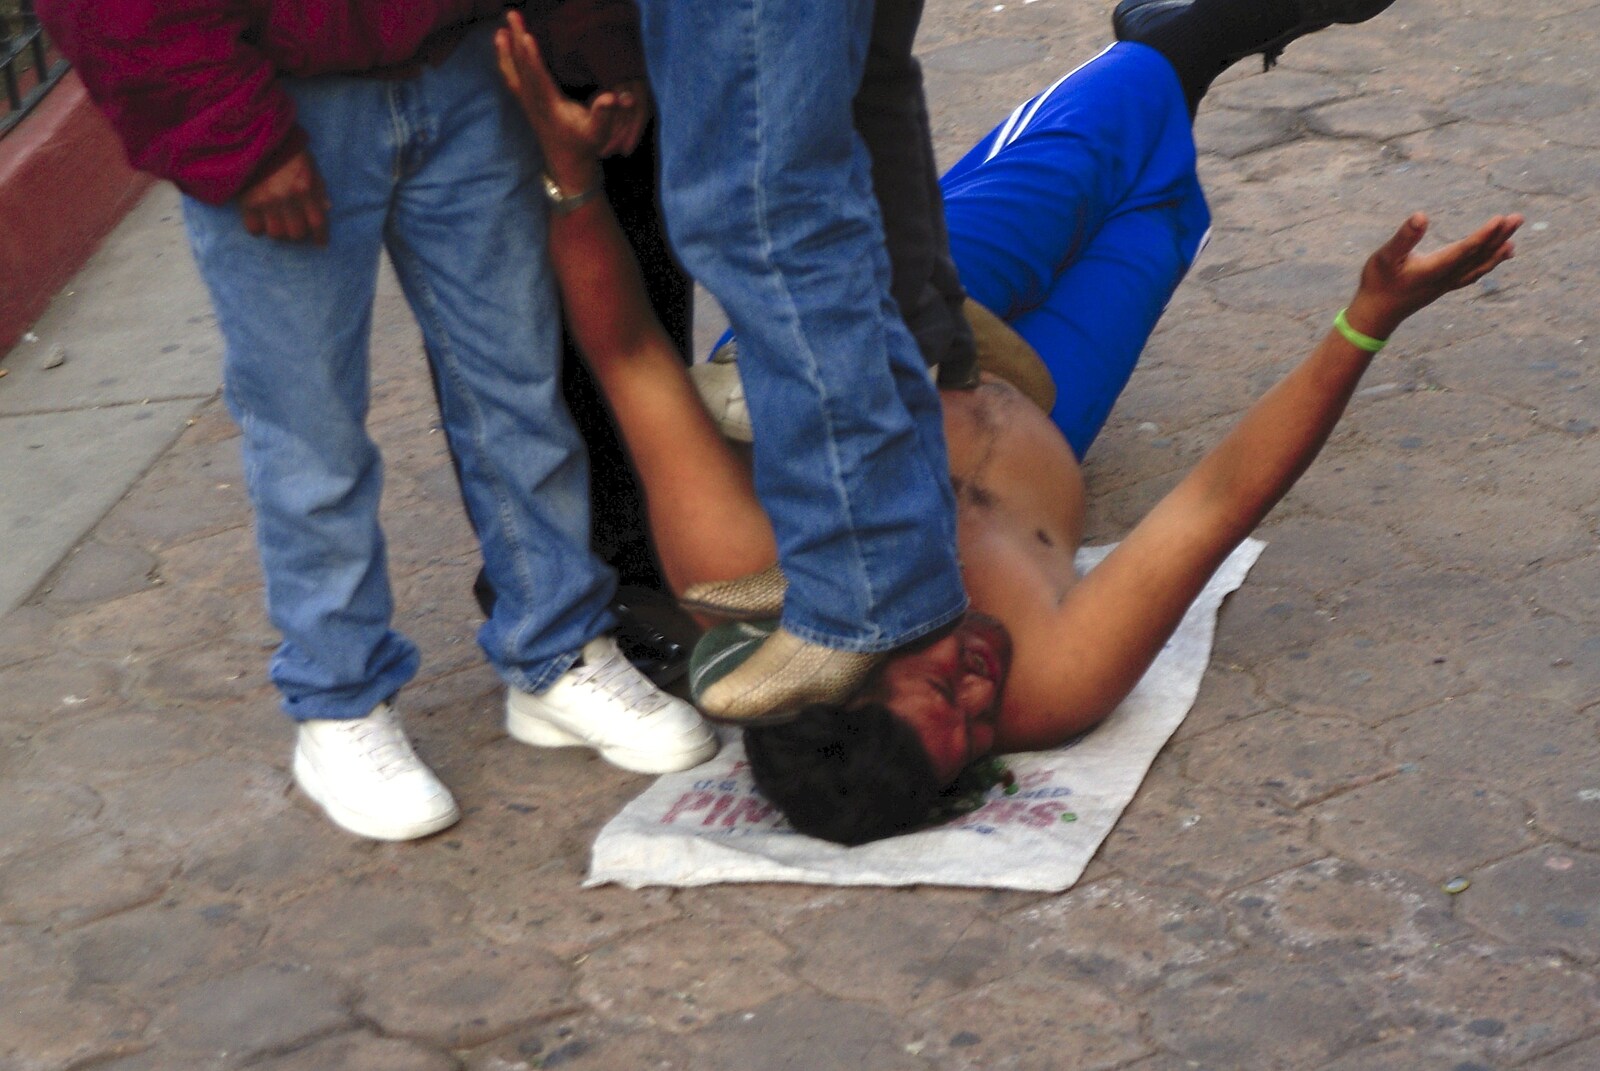 Rosarito and Tijuana, Baja California, Mexico - 2nd March 2008: An entertainer lies on broken glass and is stood on